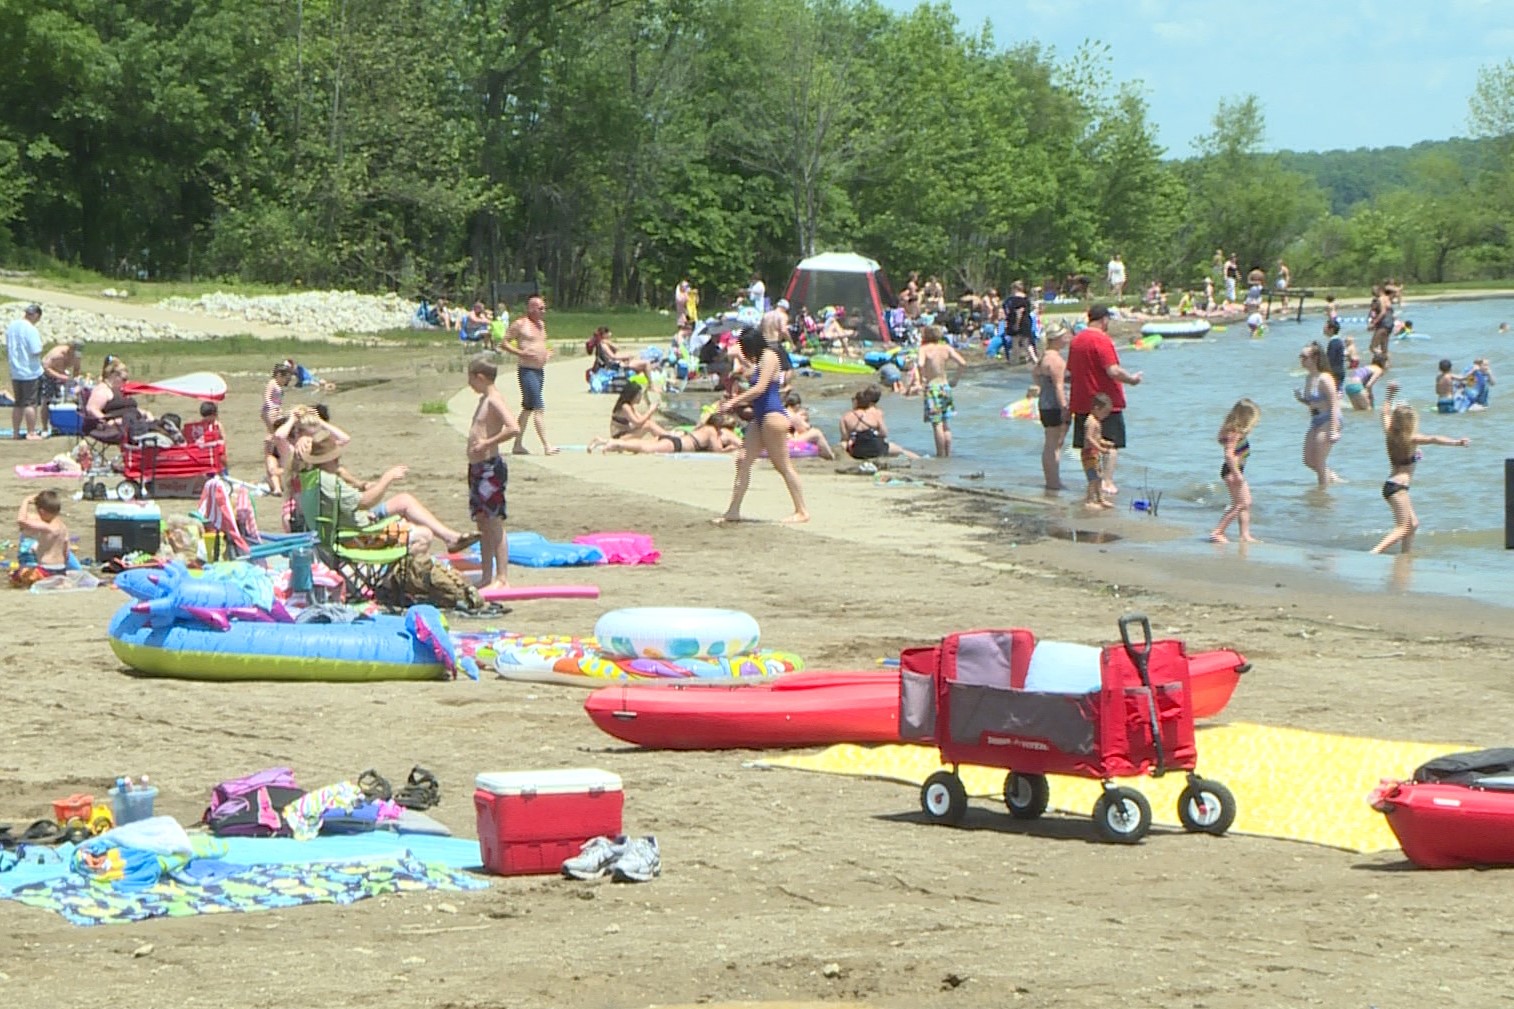 Swimmers and sunbathers crowd Fairfax SRA at Lake Monroe, Memorial Day 2020.